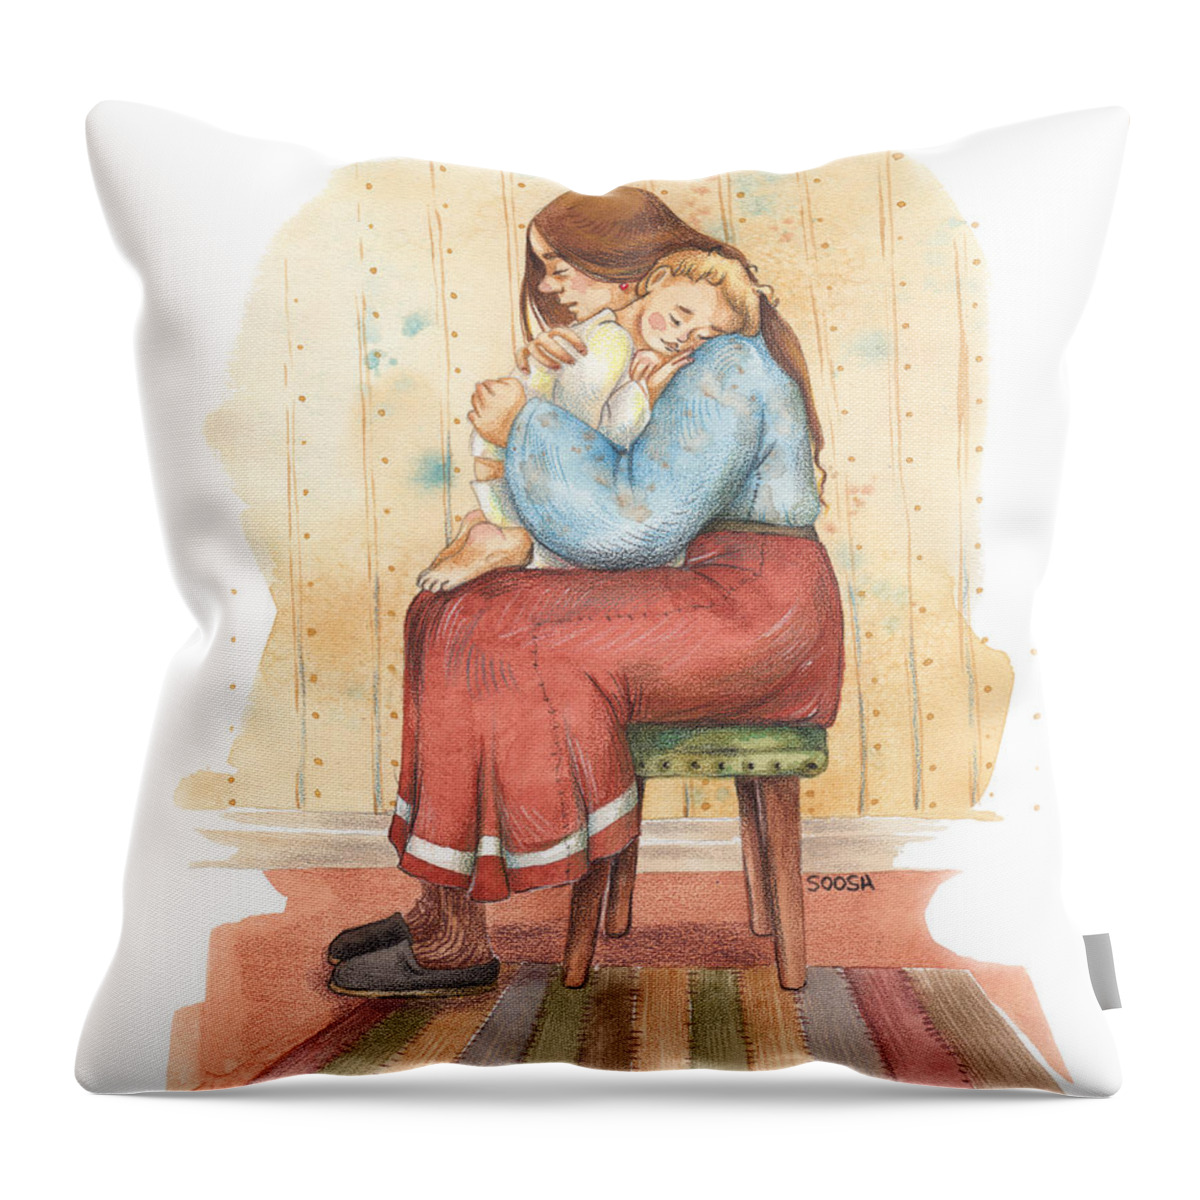 Soosh Throw Pillow featuring the drawing My boy by Soosh